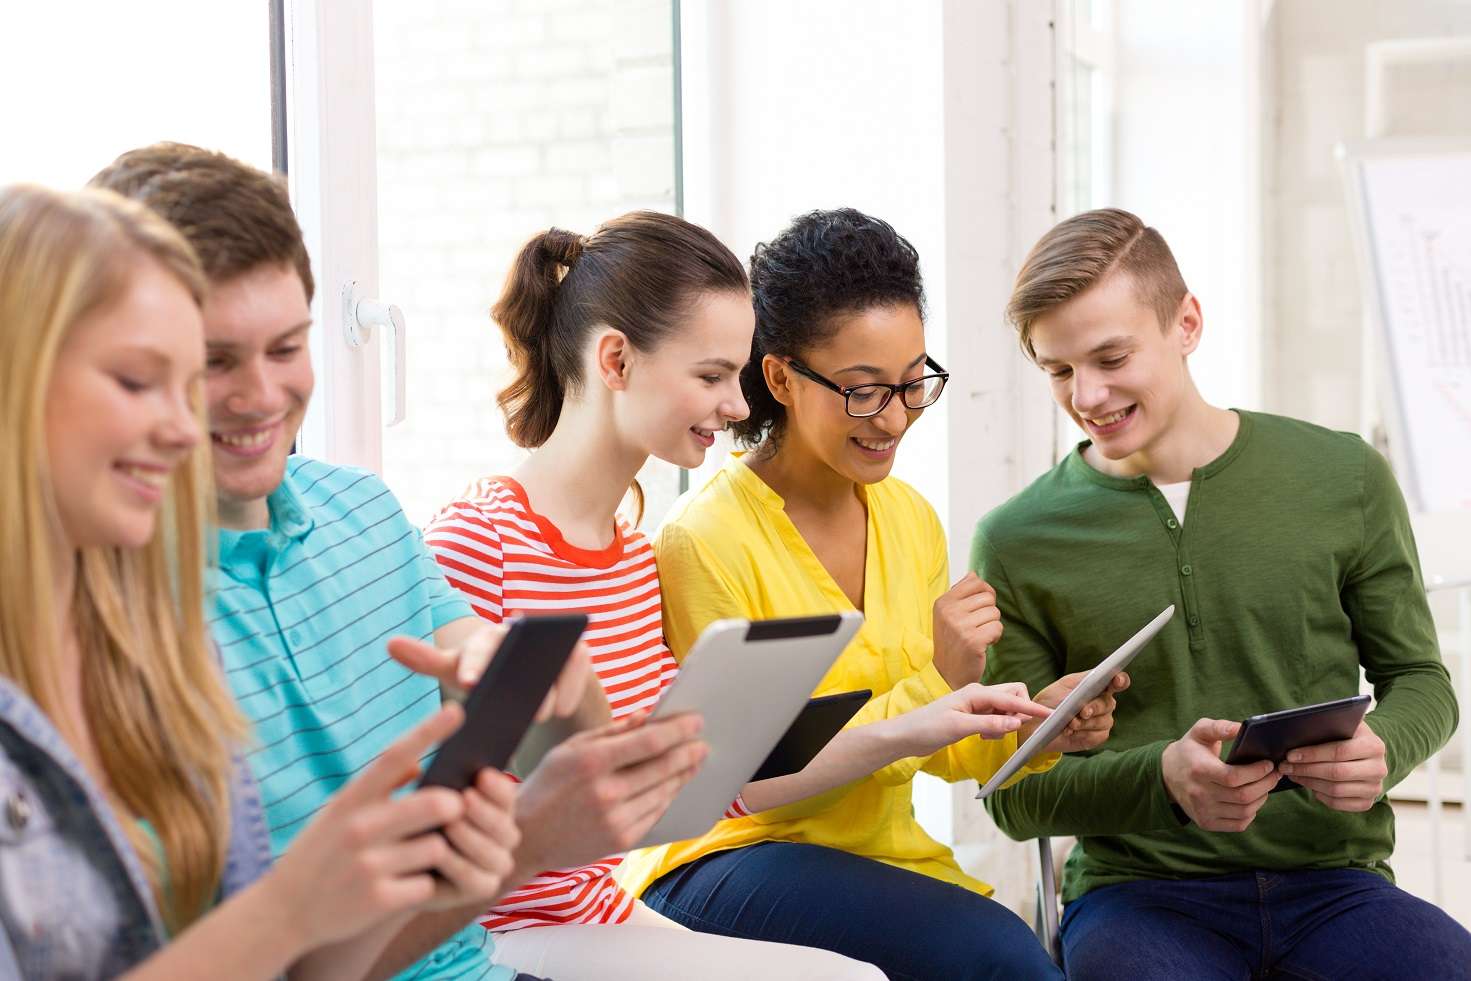 How To Keep Students Engaged In Online Learning
